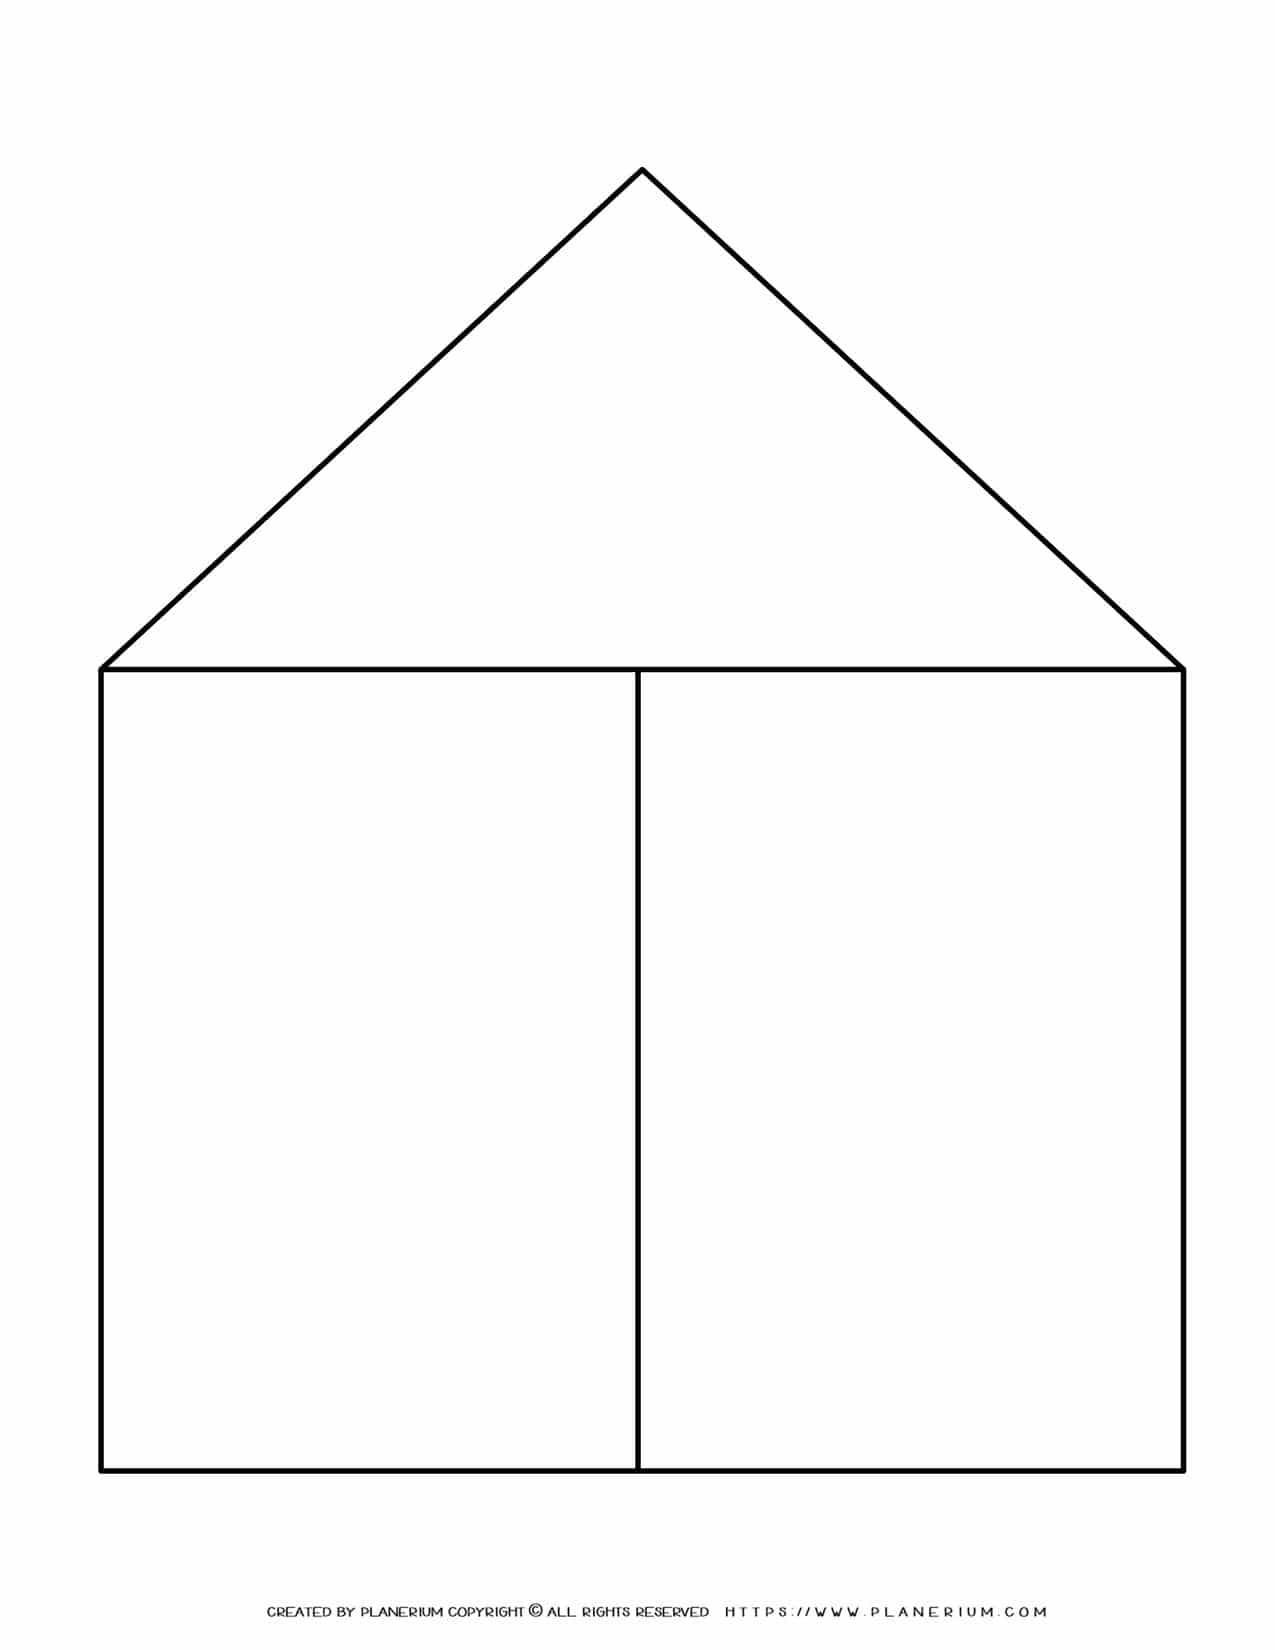 Graphic Organizer Templates - House Chart with Two Columns | Planerium